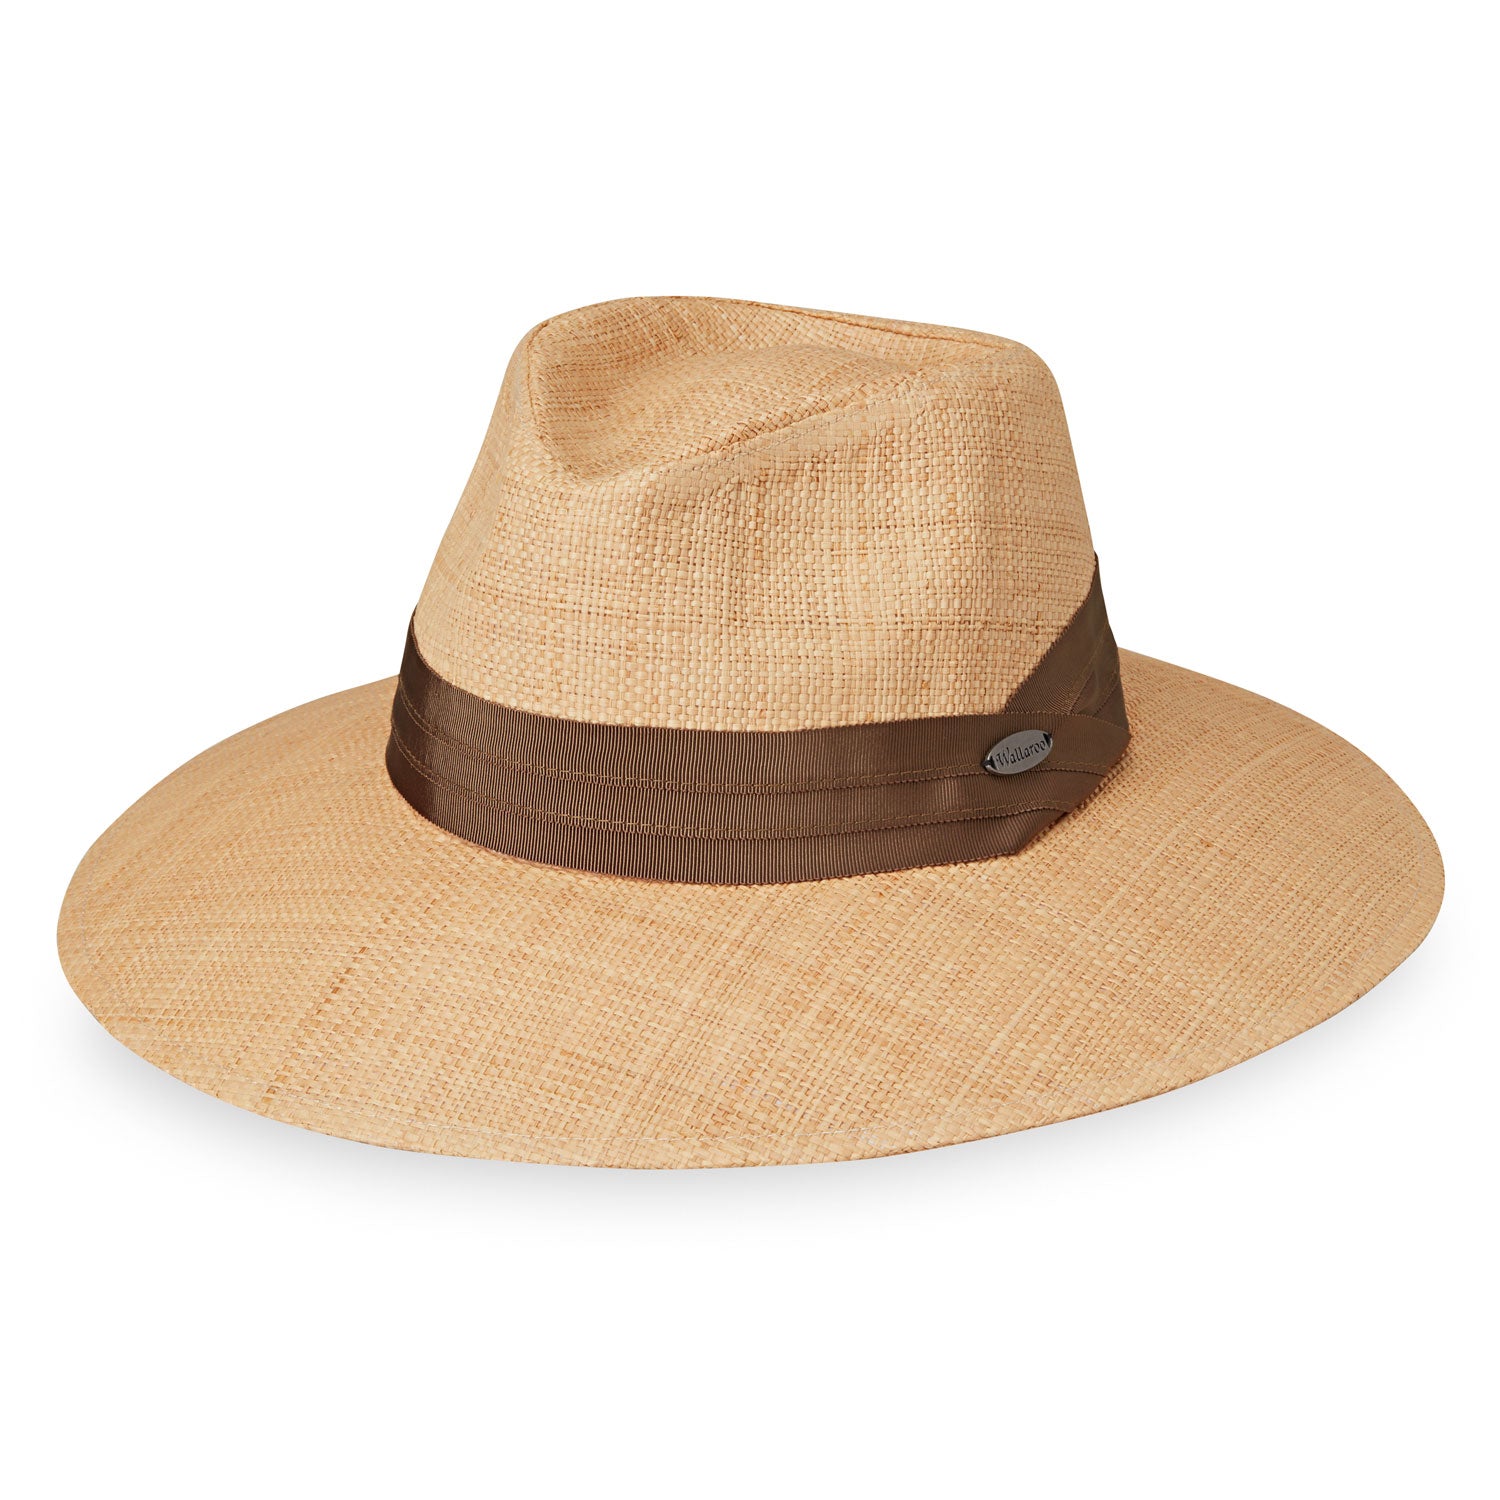 Featuring UPF Charlotte Beach Fedora Style Straw Sun Hat with cotton lining from Wallaroo